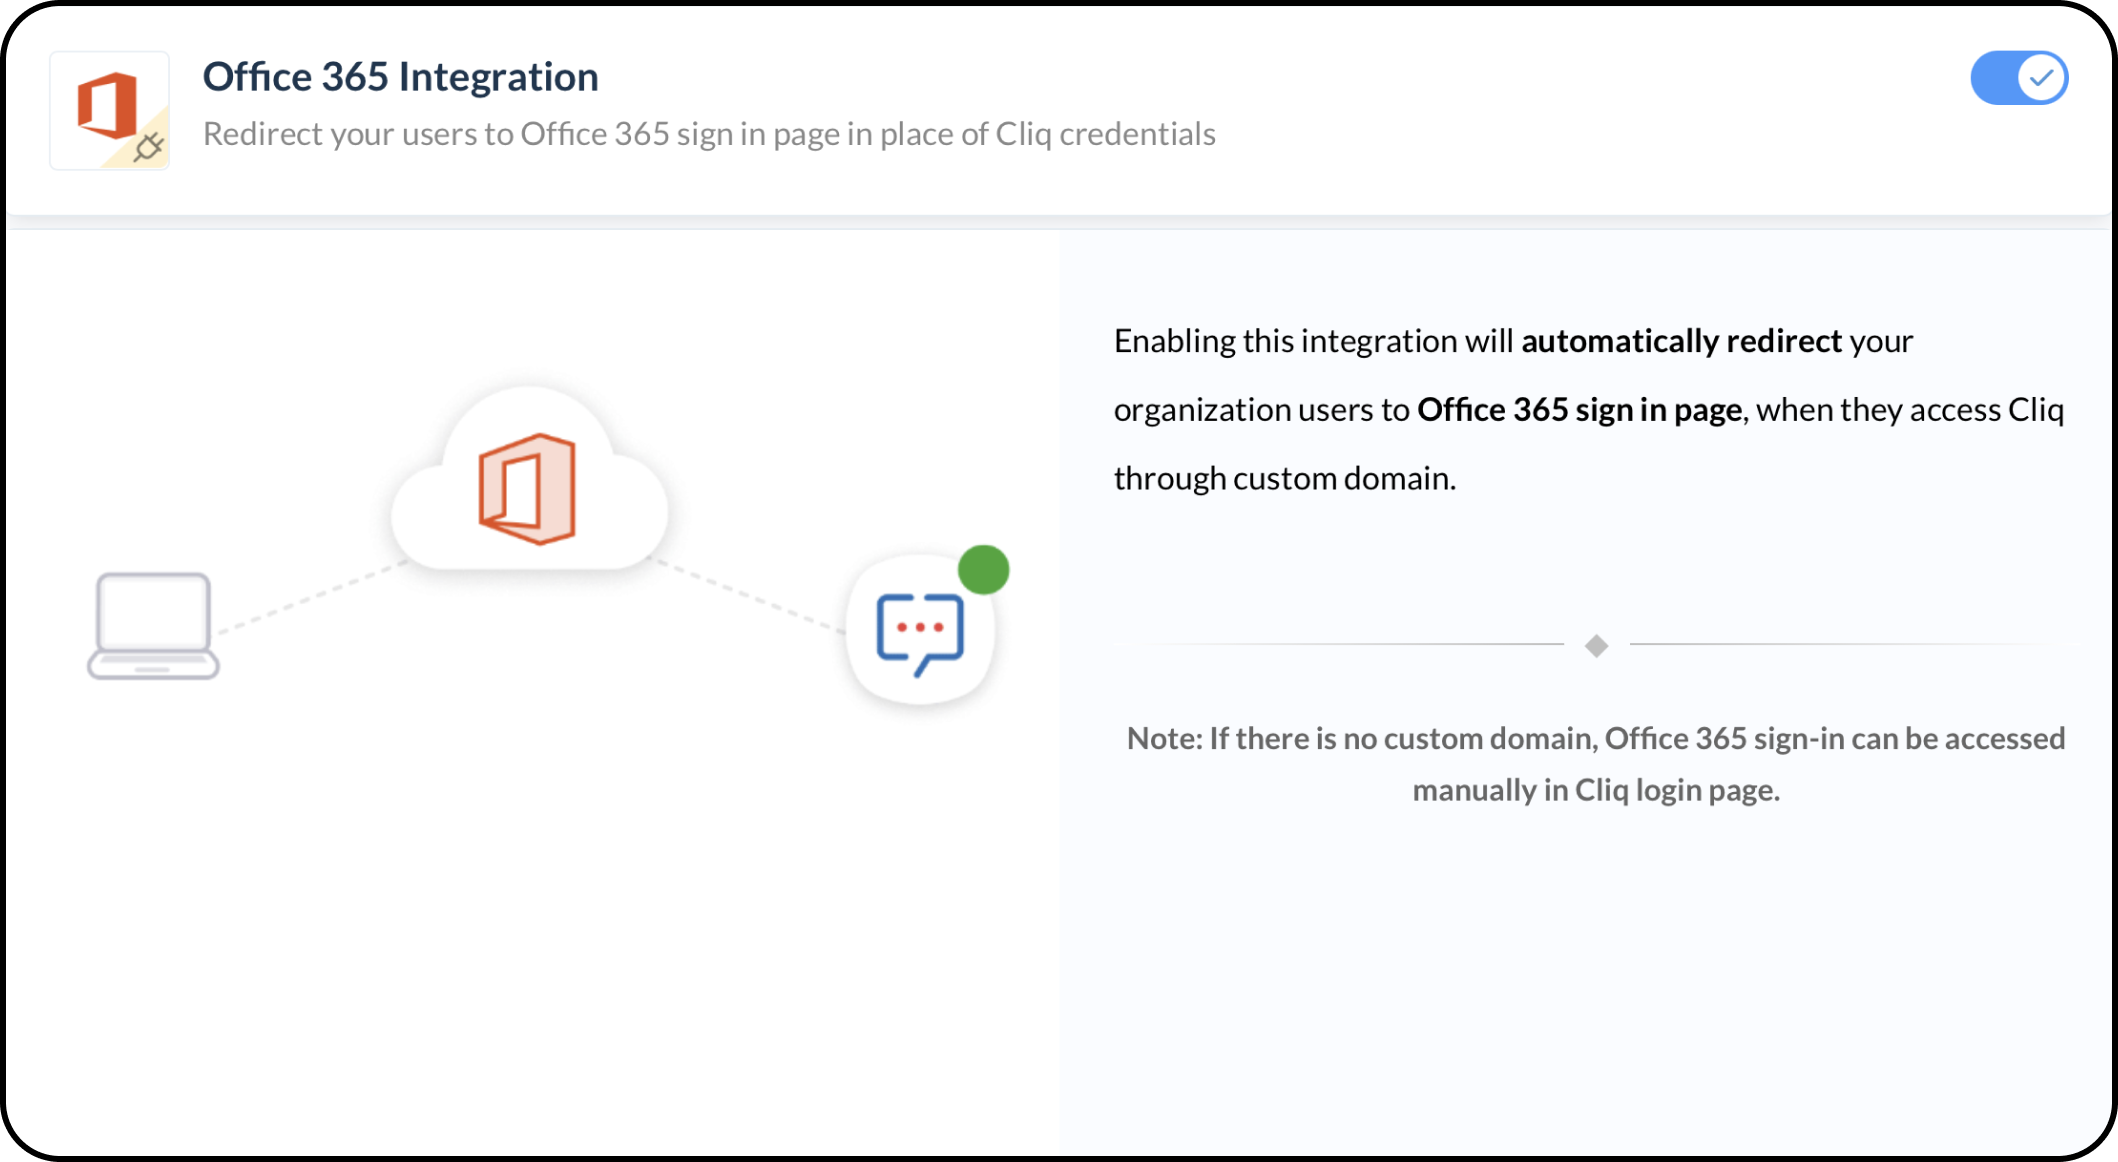 How to sign in with Office 365?